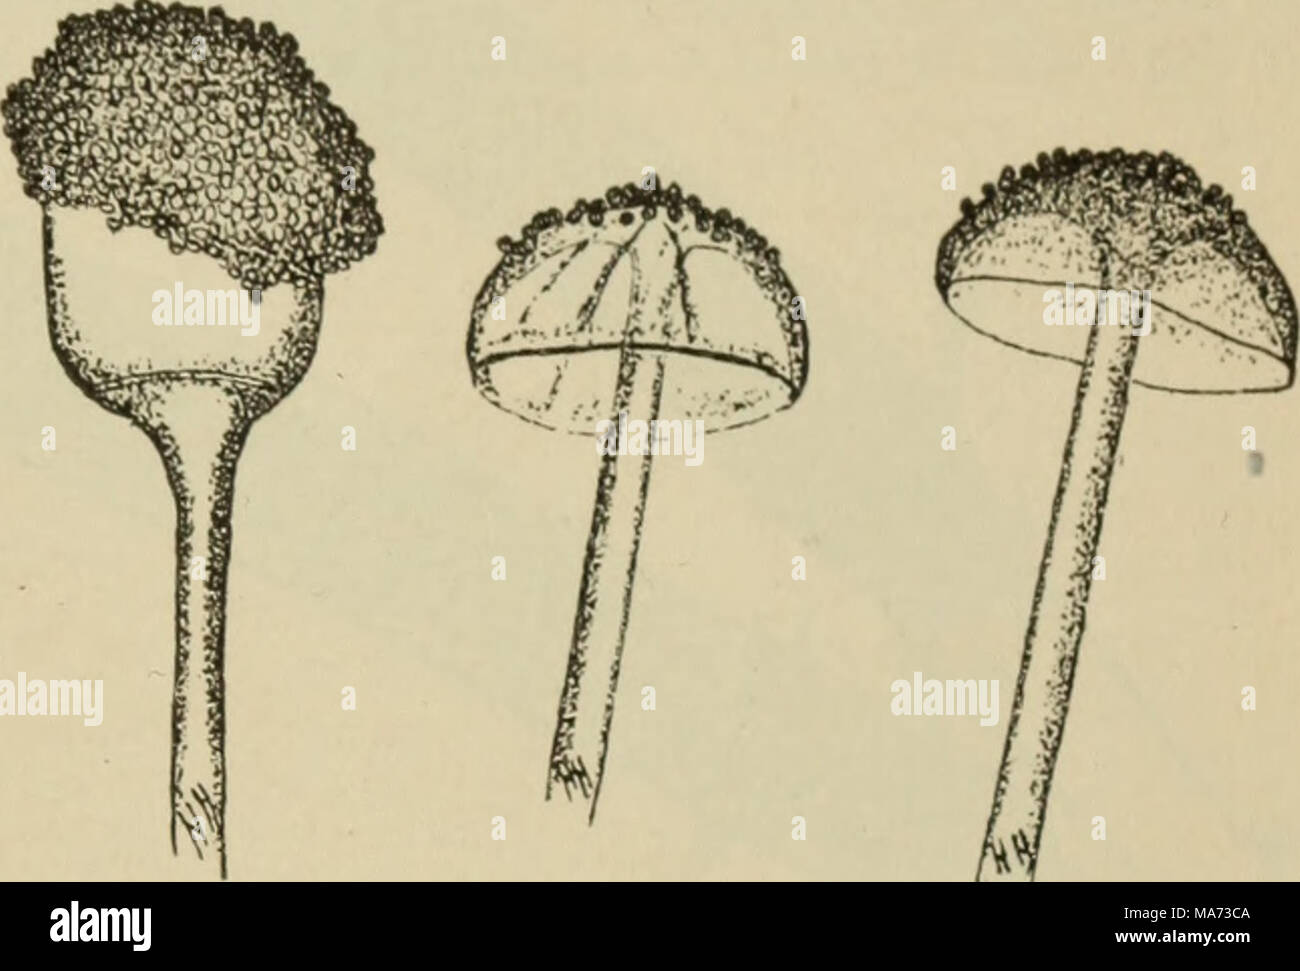 . Elementary botany . Fig. 133- A mucor (Rhizopns nigricans); at left nearly mature sporangium with columella showing within; m the middle is ruptured sporangium with some of the gonidia clinging to the colu- mella ; at right two ruptured sporangia with everted columella. capable of growing and forming called chlamy do spores. the mycelium again. They are sometimes Water Moulds (Saprolegnia). 279. The water moulds are very interesting plants to study because they are so easy to obtain, and it is so easy to observe a type of gonidium here to which we have referred in our studies ofthealgae, the Stock Photo